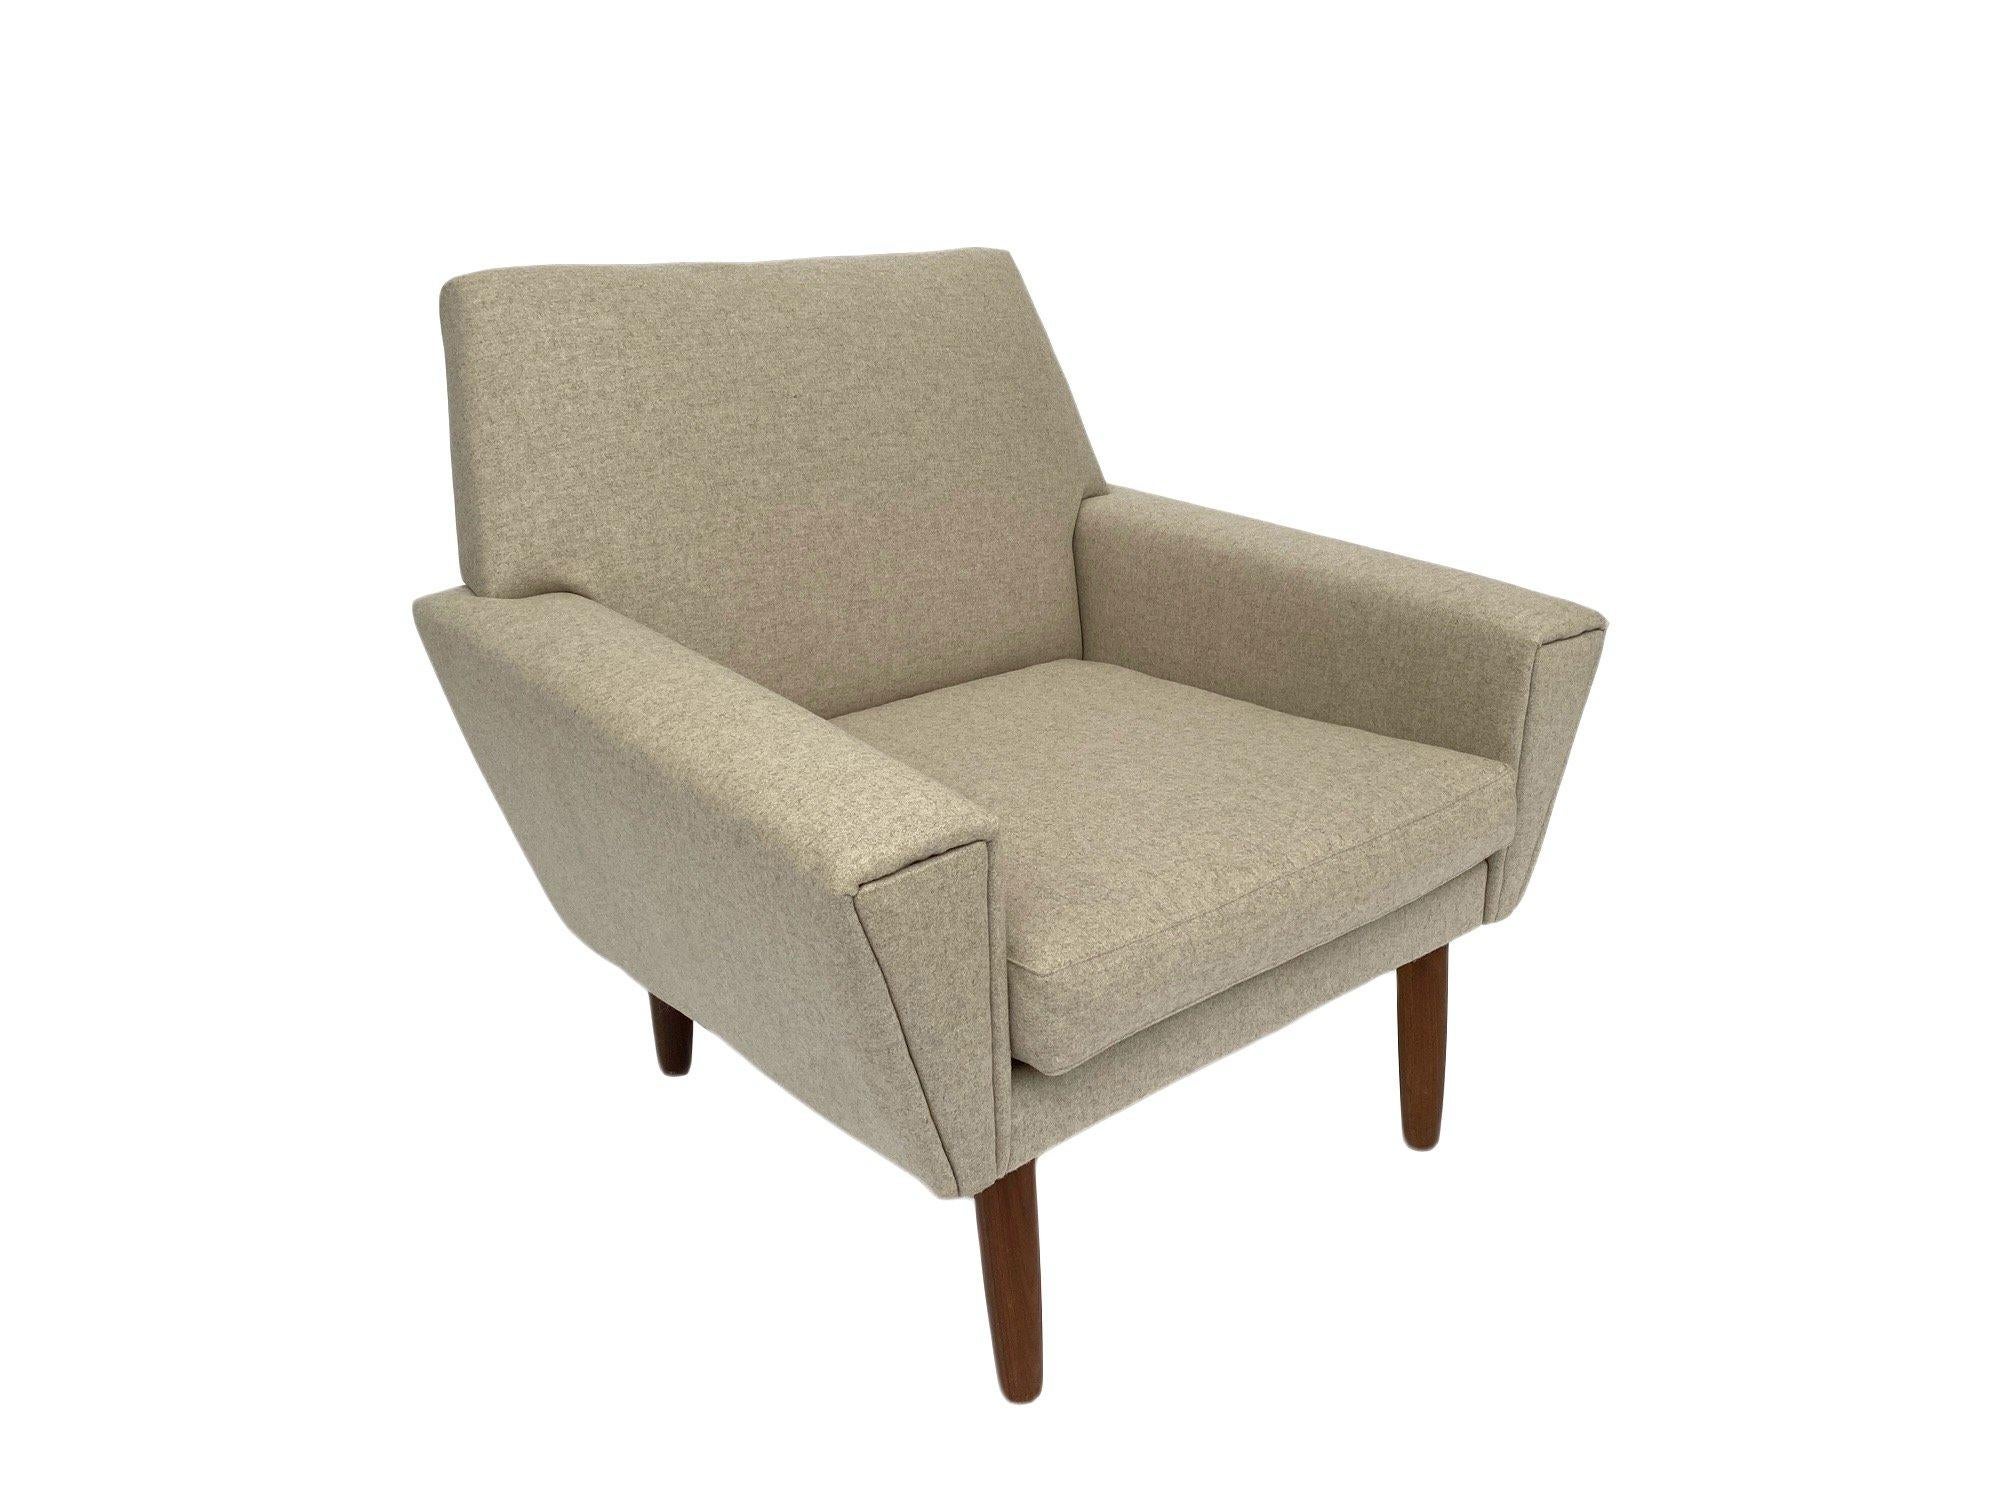 A beautiful Danish cream wool and teak armchair, this would make a stylish addition to any living or work area.

The chair has a wide seat and padded backrest for enhanced comfort. A striking piece of classic Scandinavian furniture.

The chair